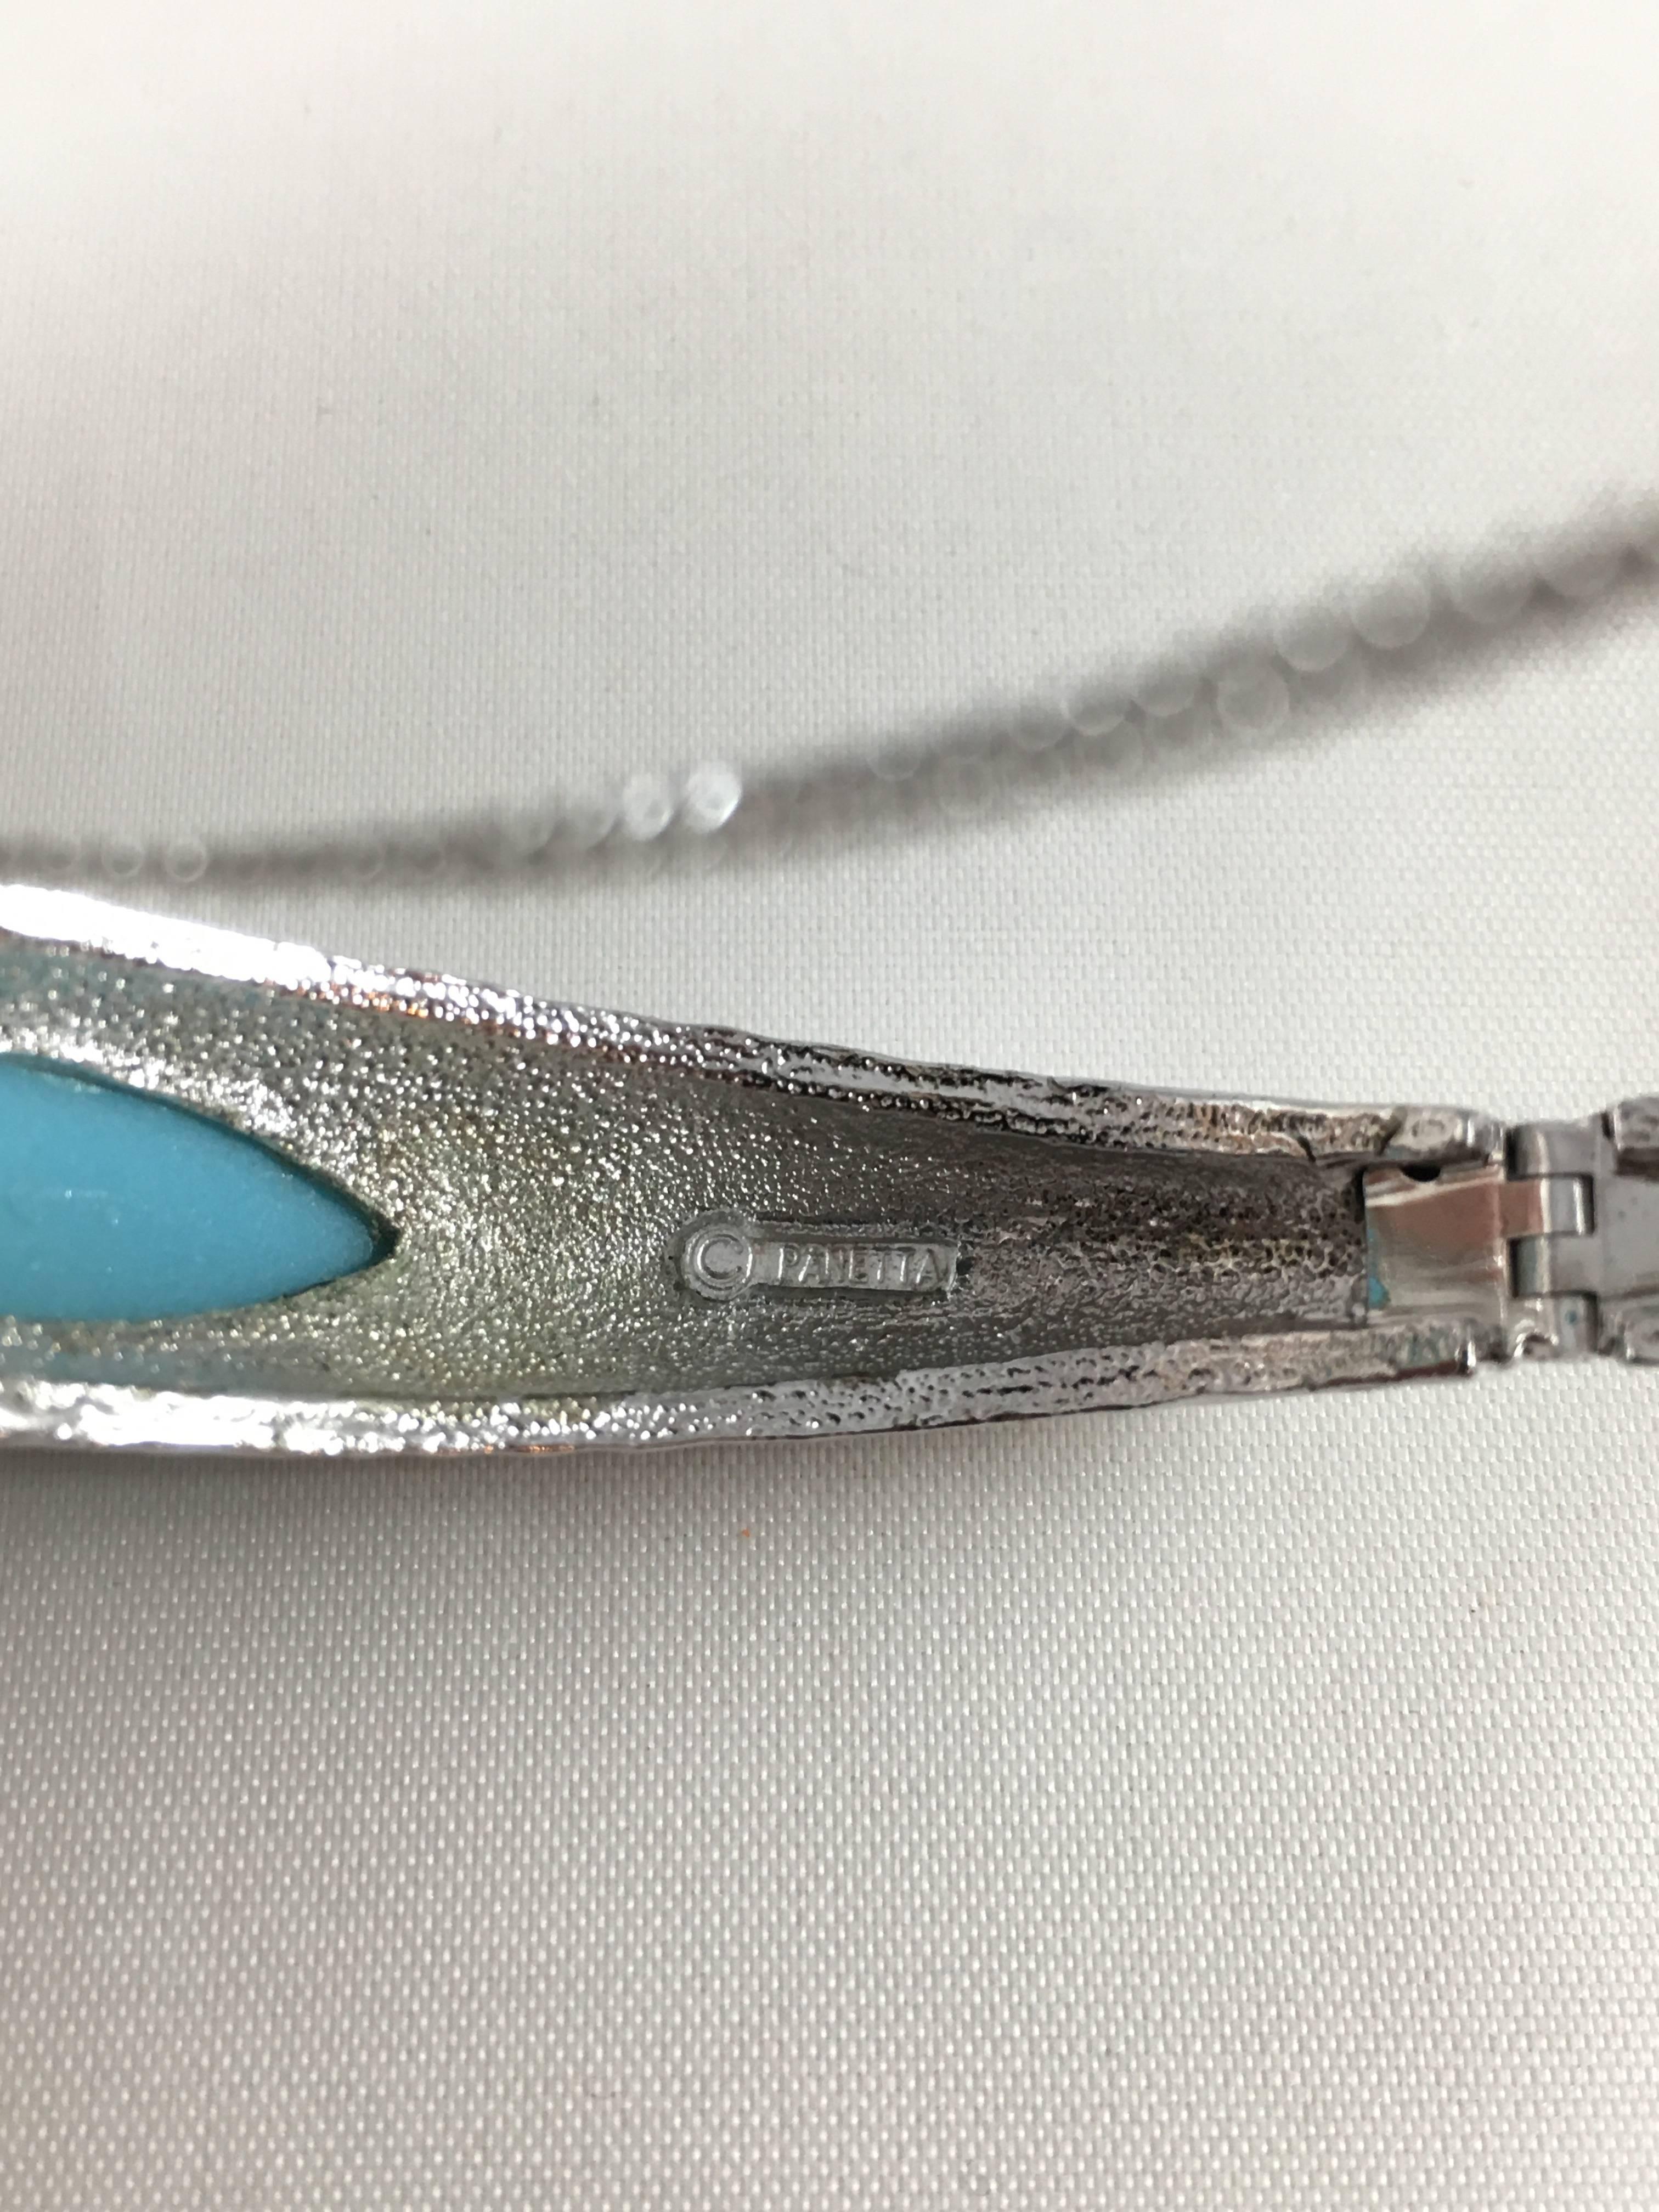 Panetta Vintage Hammered Silver and Turquoise Bracelet, 1970s  For Sale 3